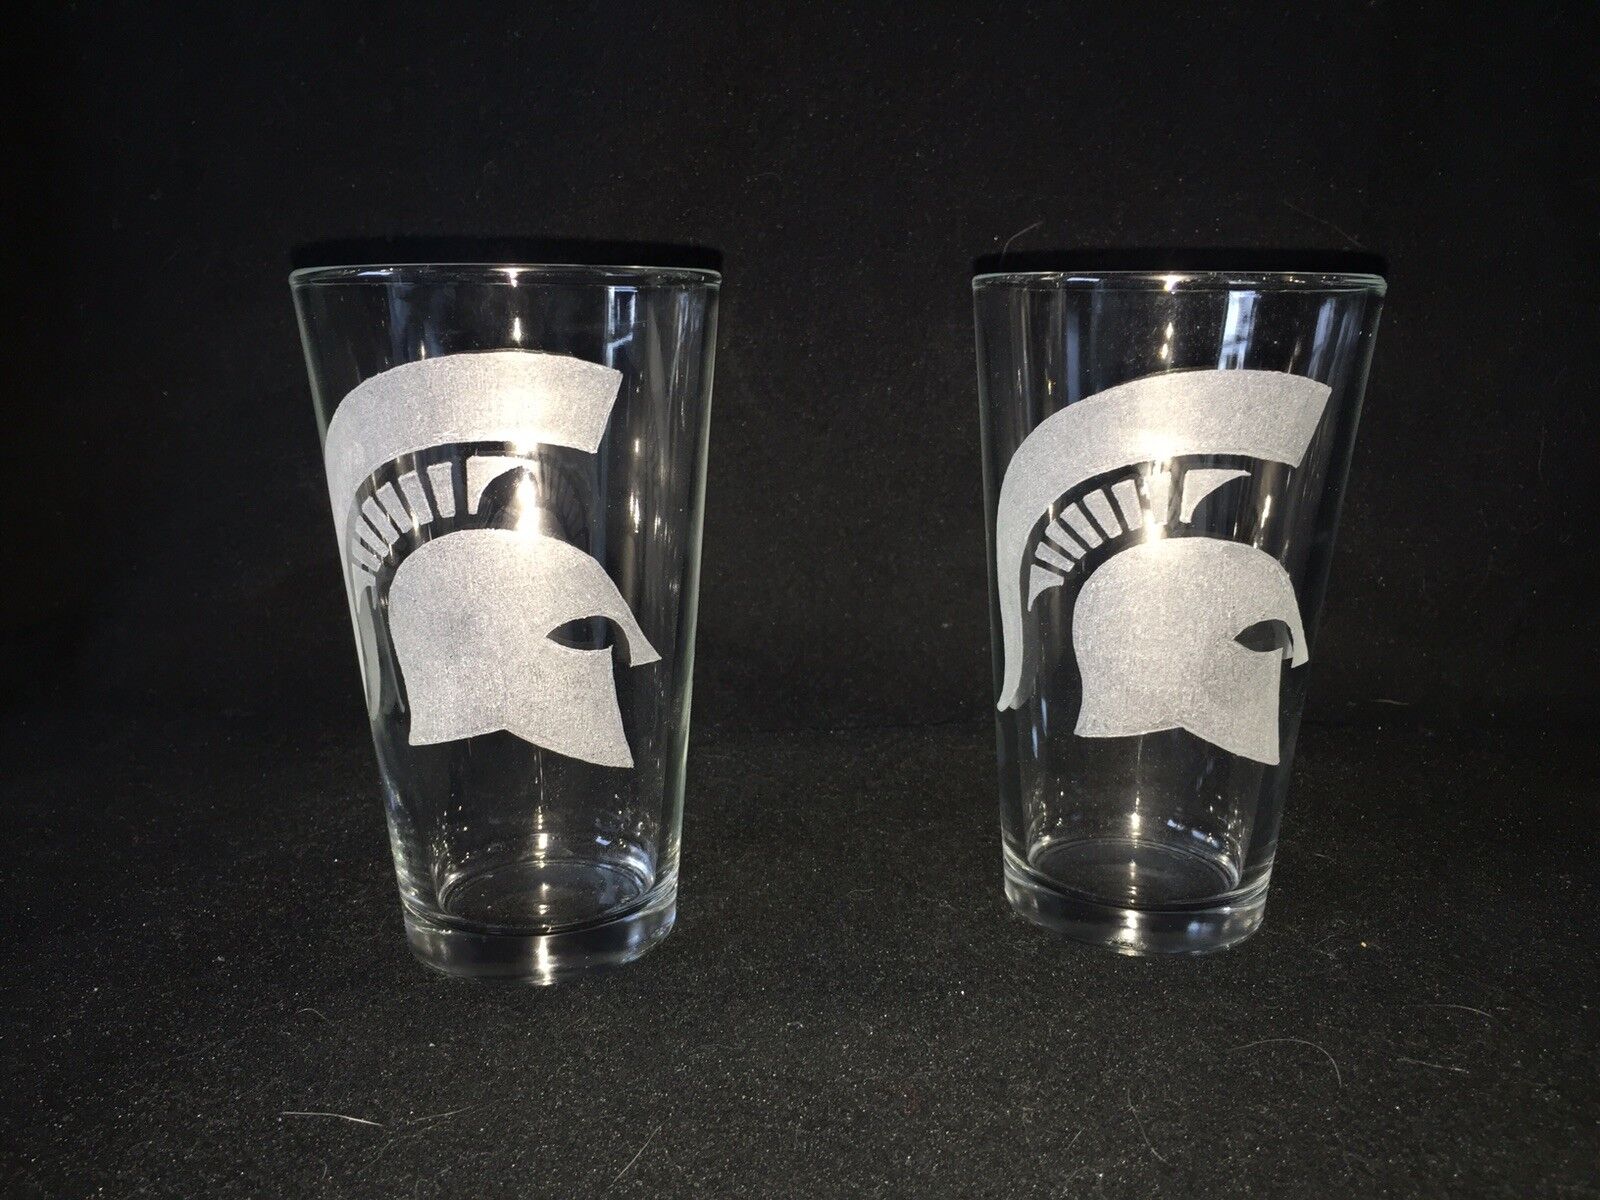 Michigan State Hand Etched (with a Dremel) Pint Glasses